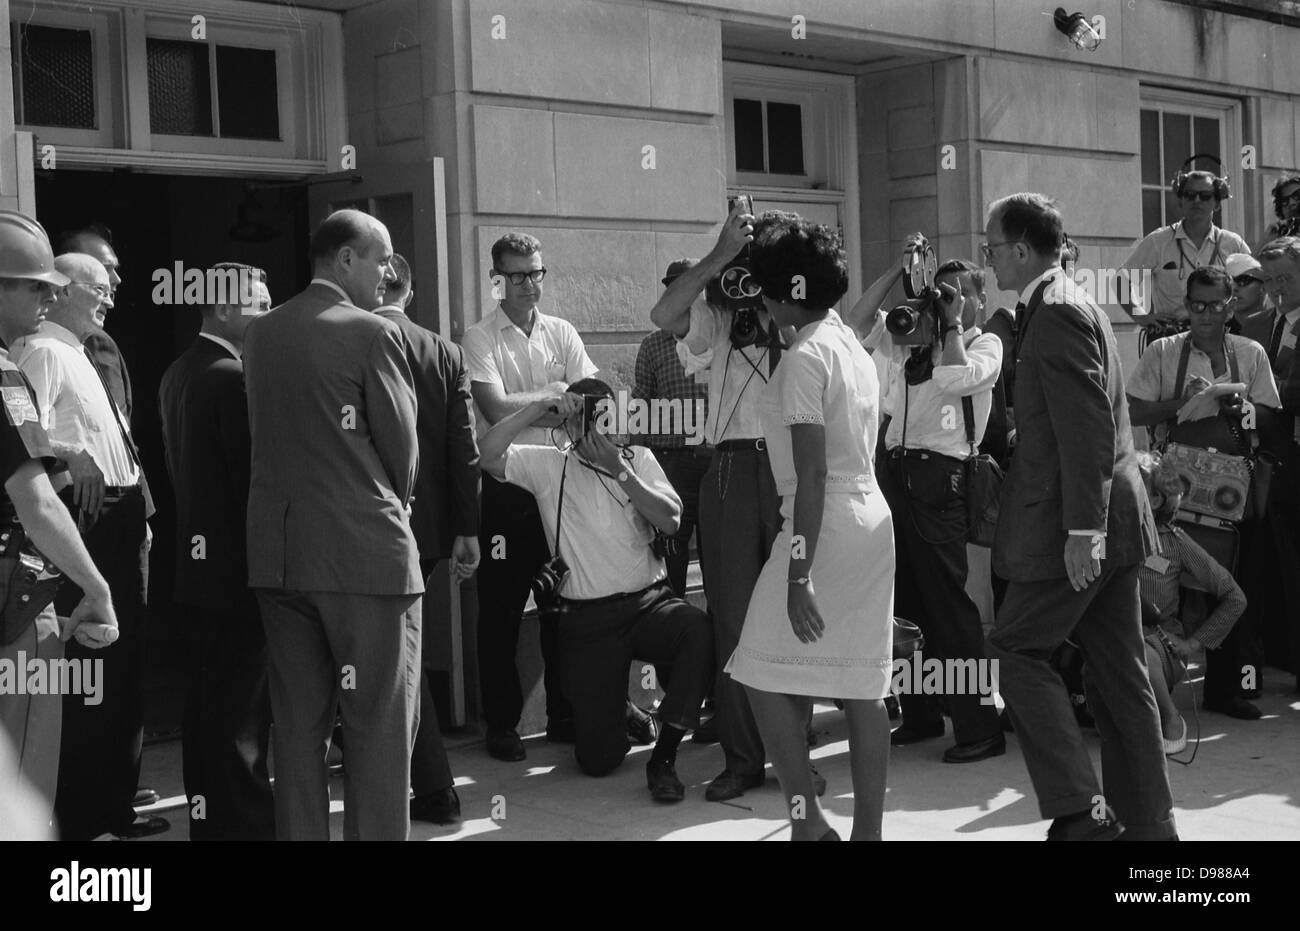 Vivian Malone entering Foster Auditorium to register for classes at the University of Alabama. One of the first African Americans to attend the university. Photographer: Warren K.Leffler. Stock Photo